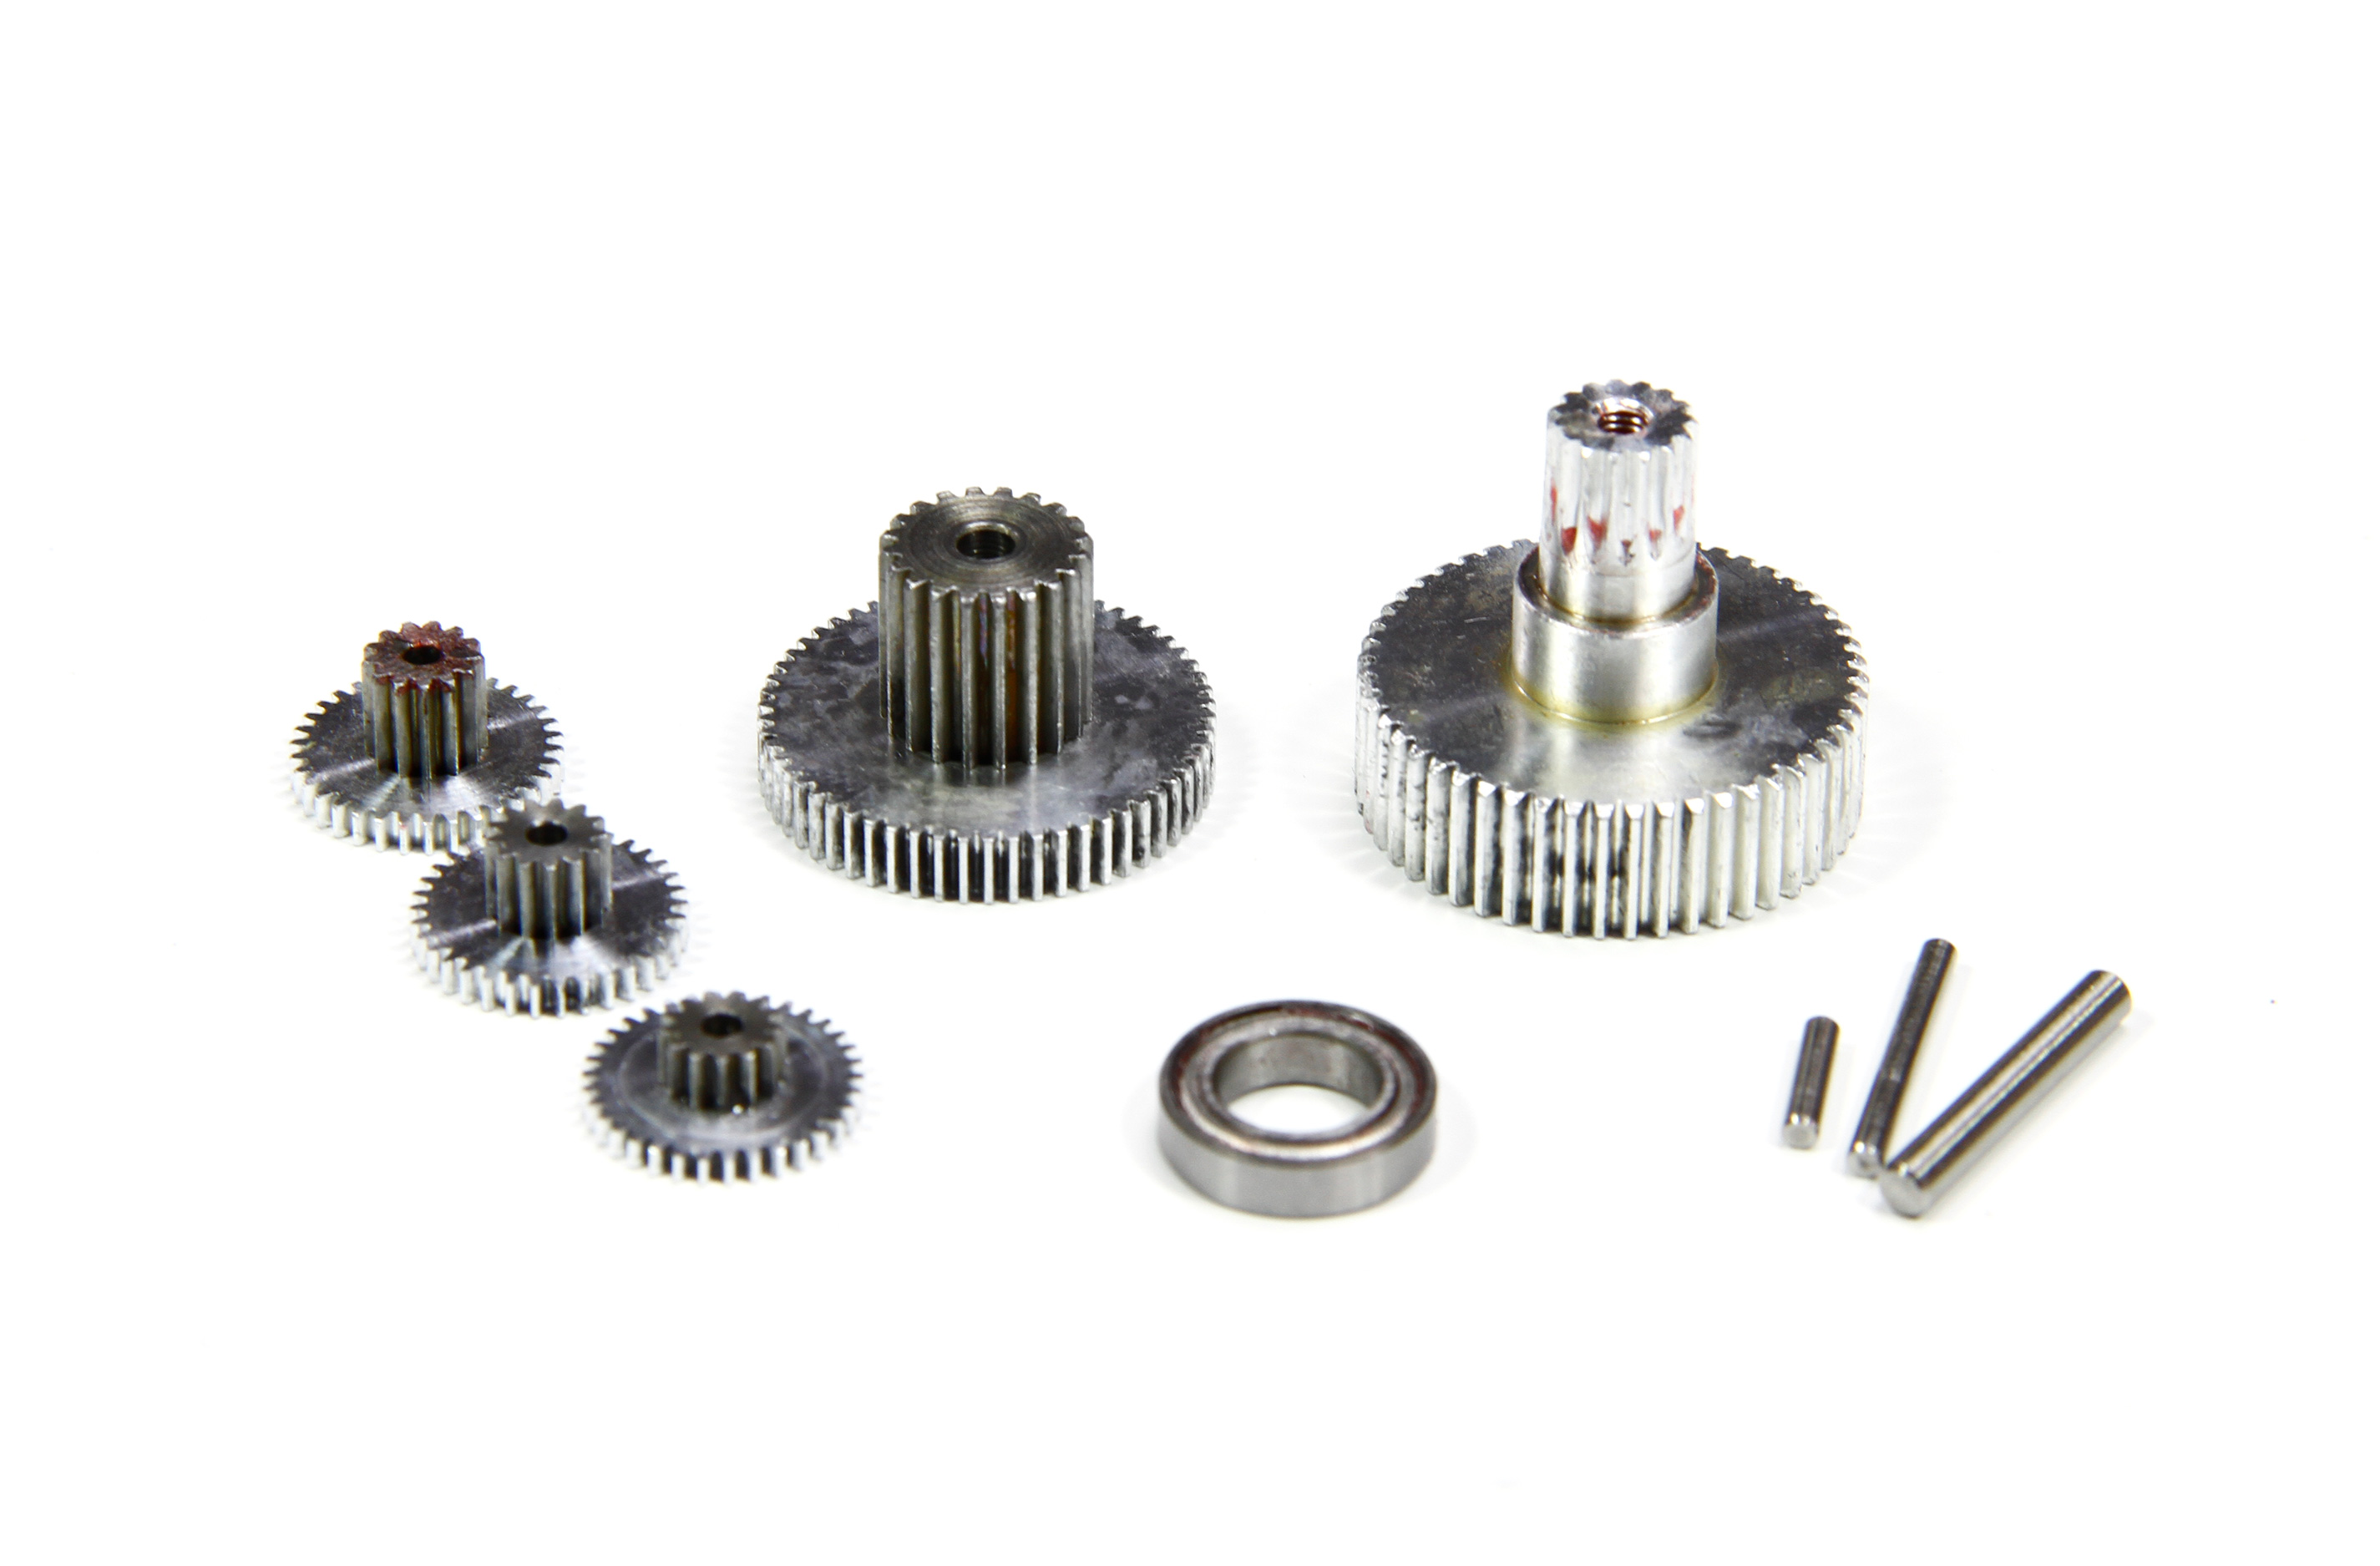 DM4000/04 gears and bearings set for K-Power